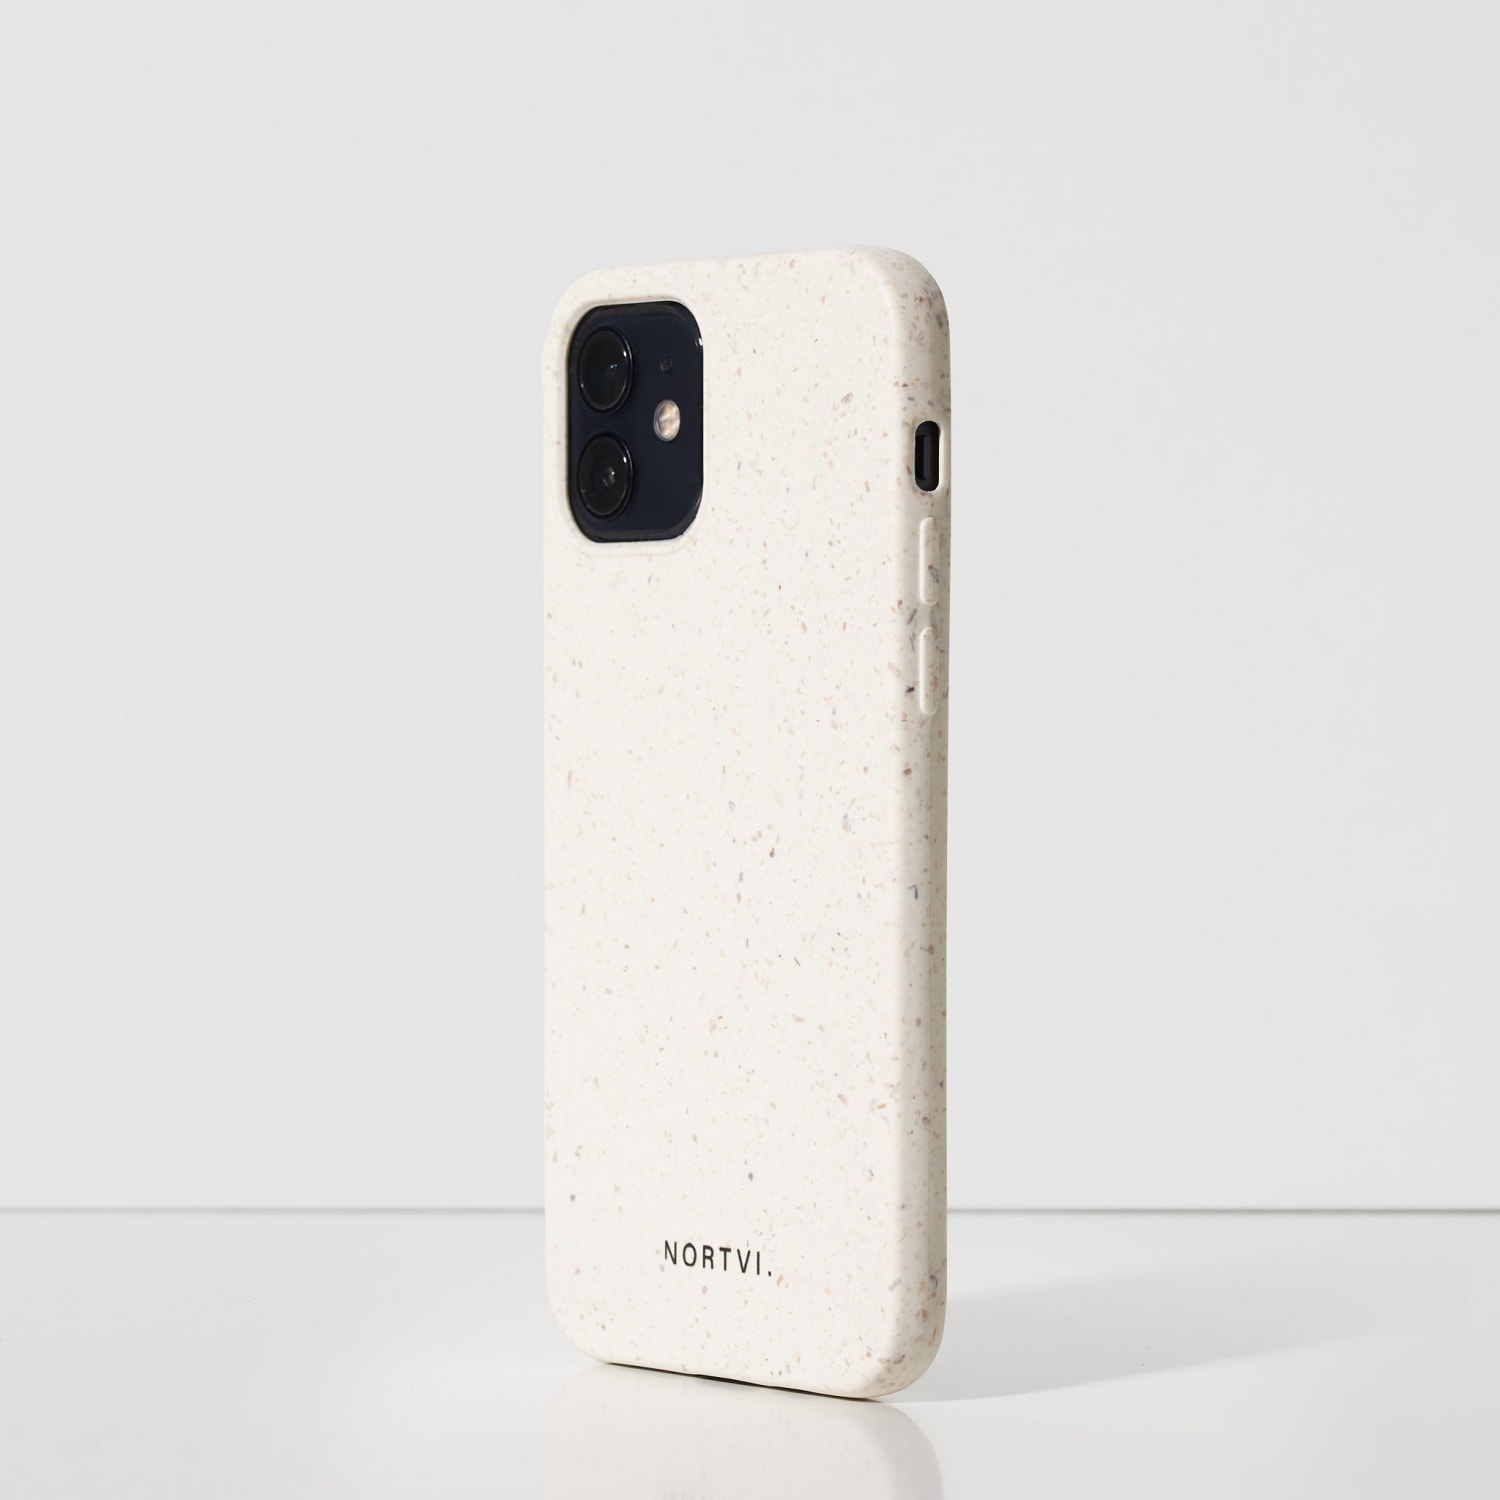 NORTVI white phone case for iPhone 13